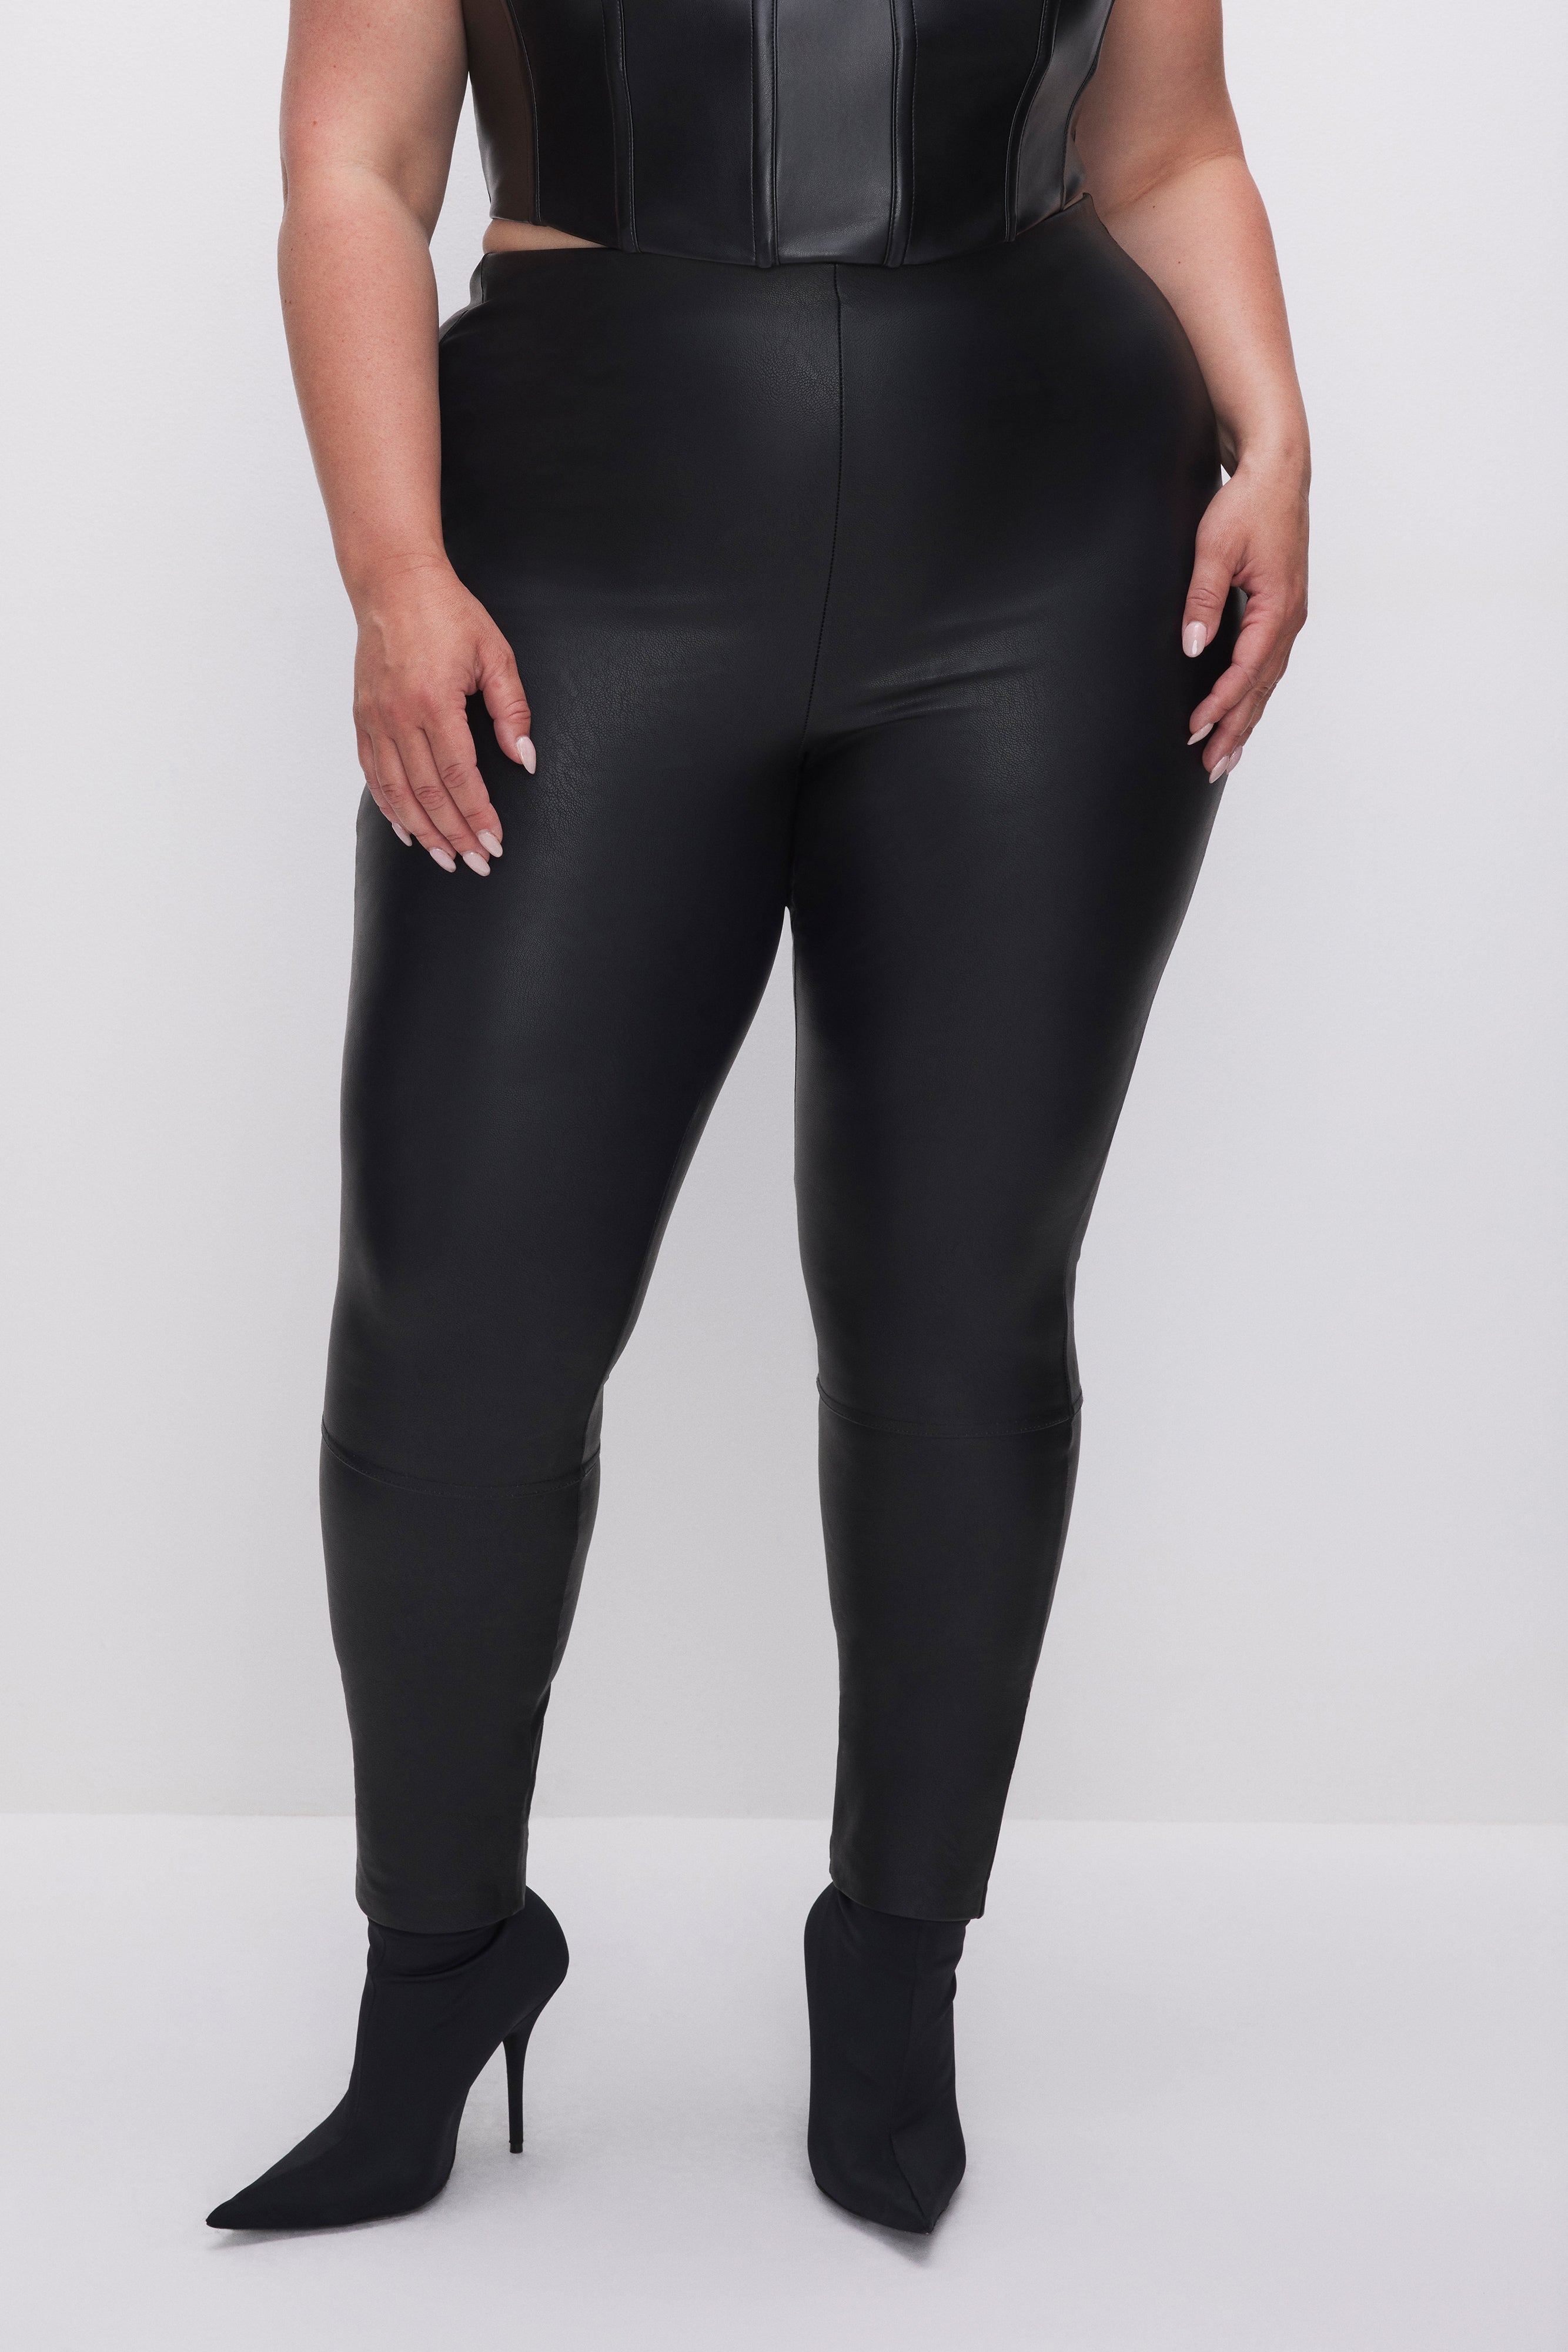 I got these faux leather leggings in black too 🔥🫶🏻 true to size